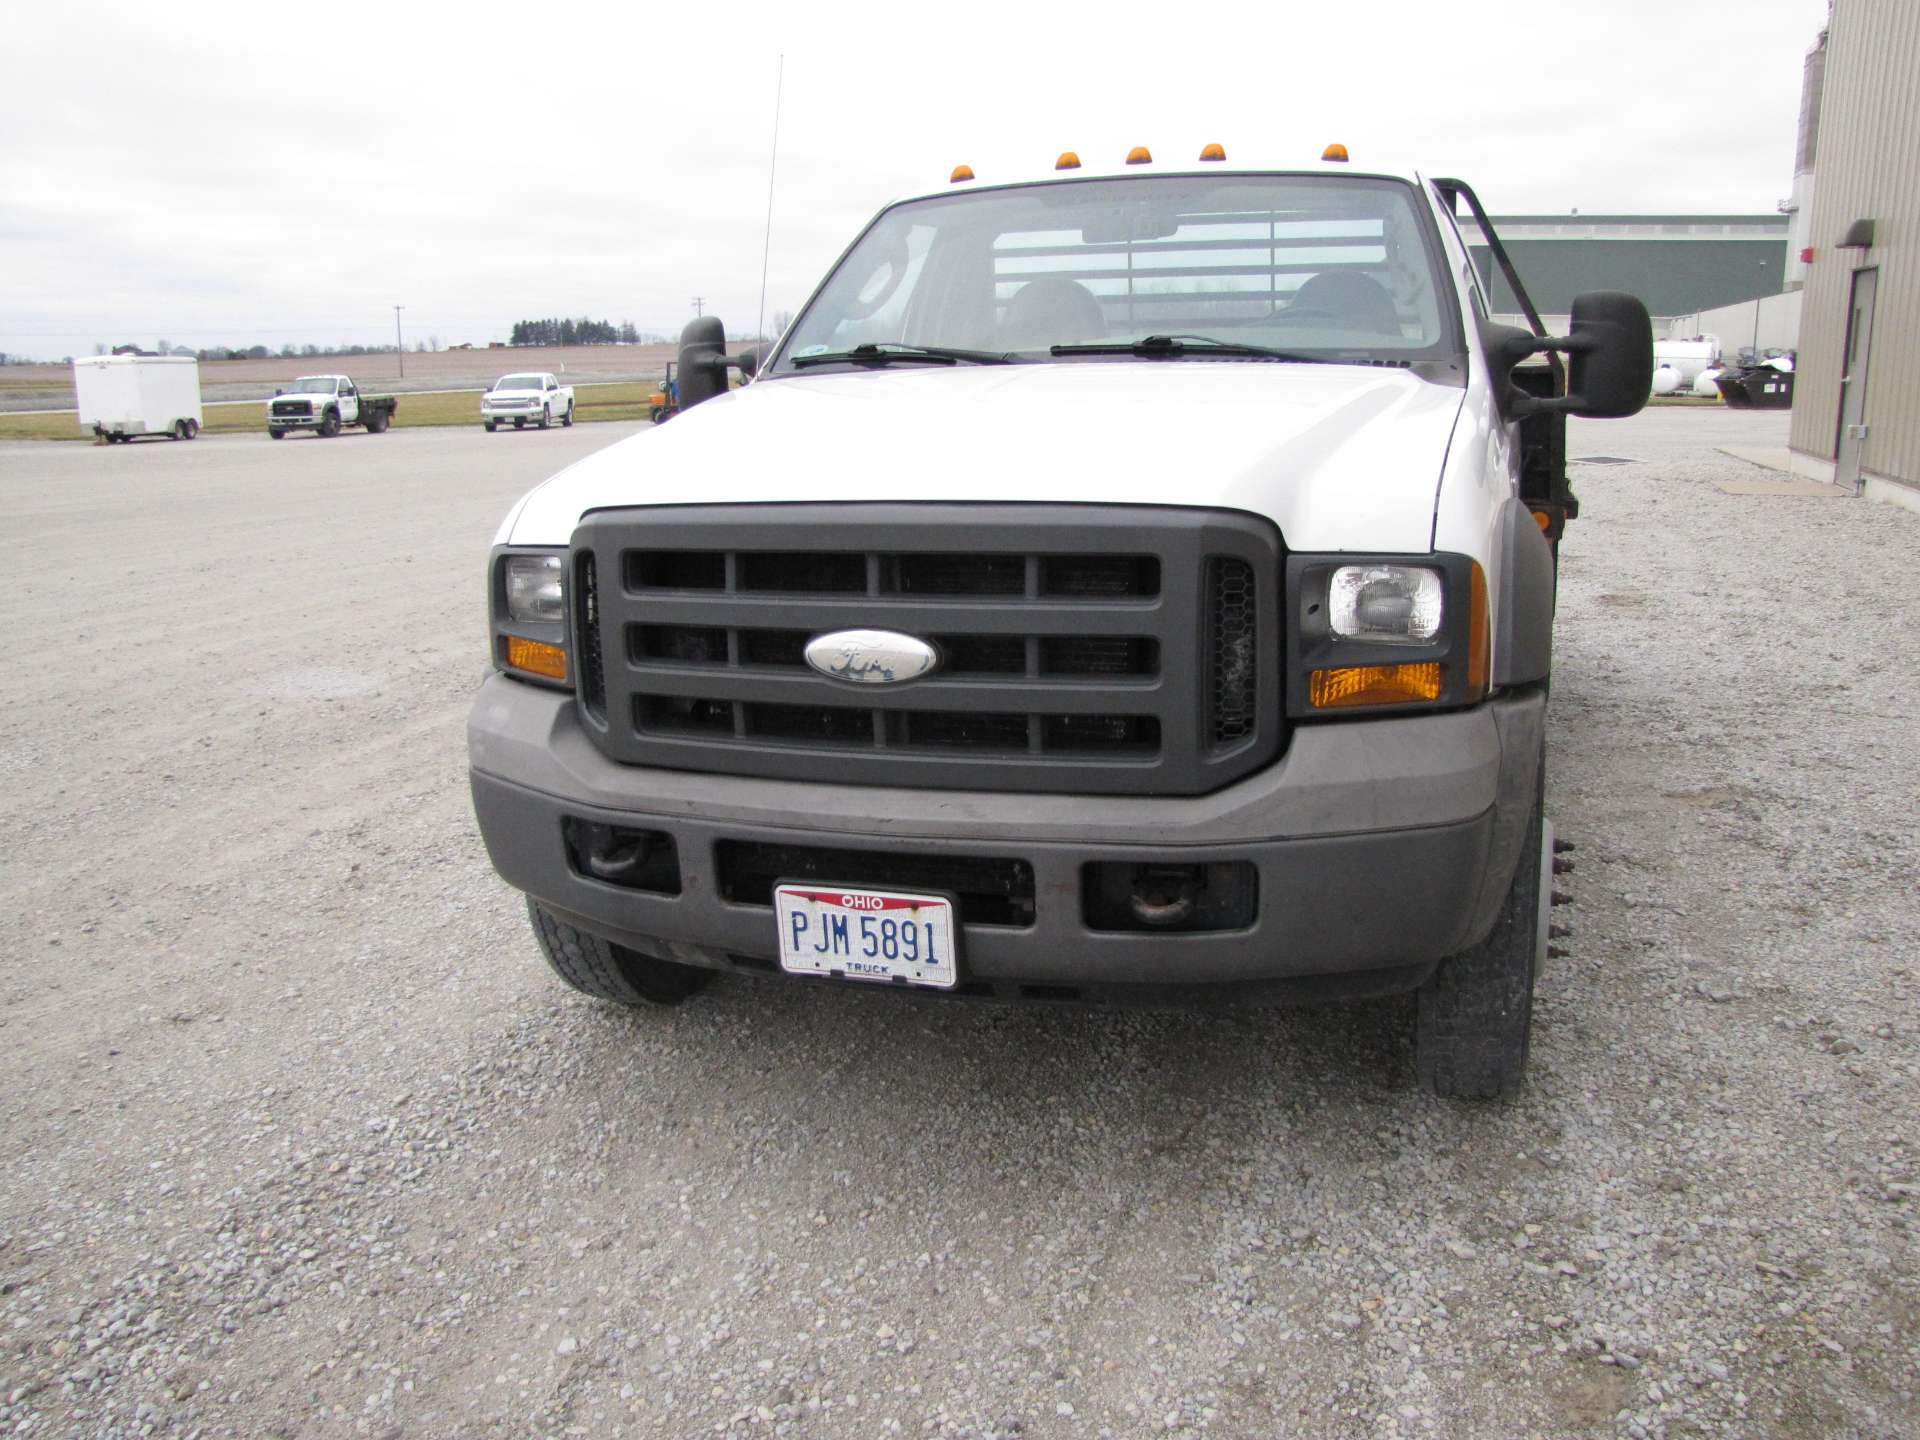 2005 Ford F450 XL Super Duty pickup truck - Image 11 of 55